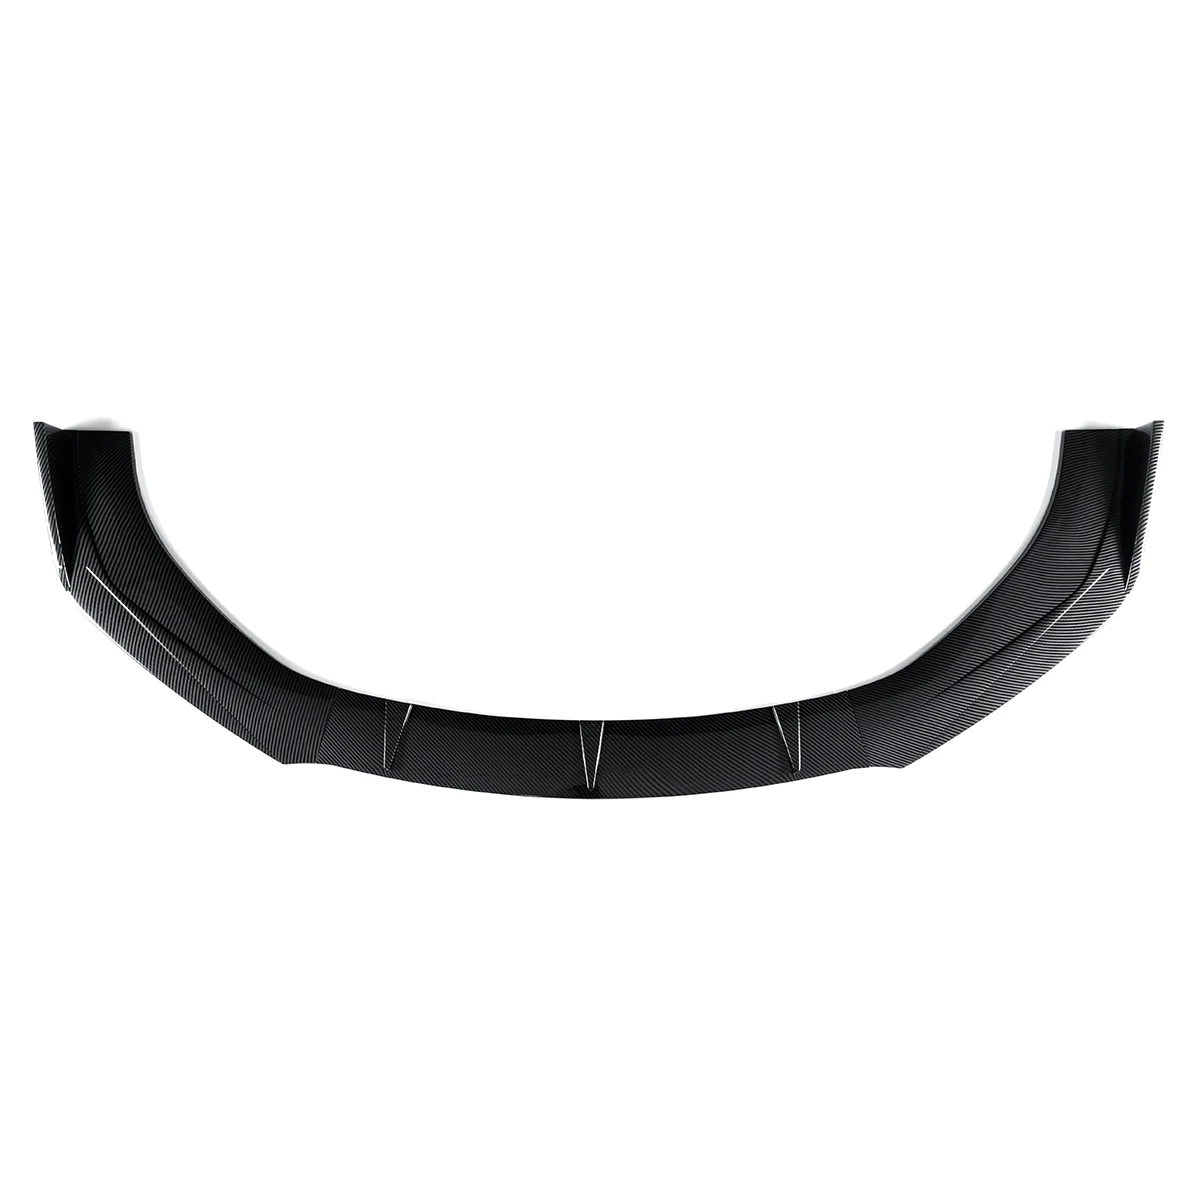 New Universal Car Front Bumper Splitter Lip Body Kit Spoiler Diffuser For Audi A5 Sline S5 RS5 09-16 For BMW For Benz For Mazad